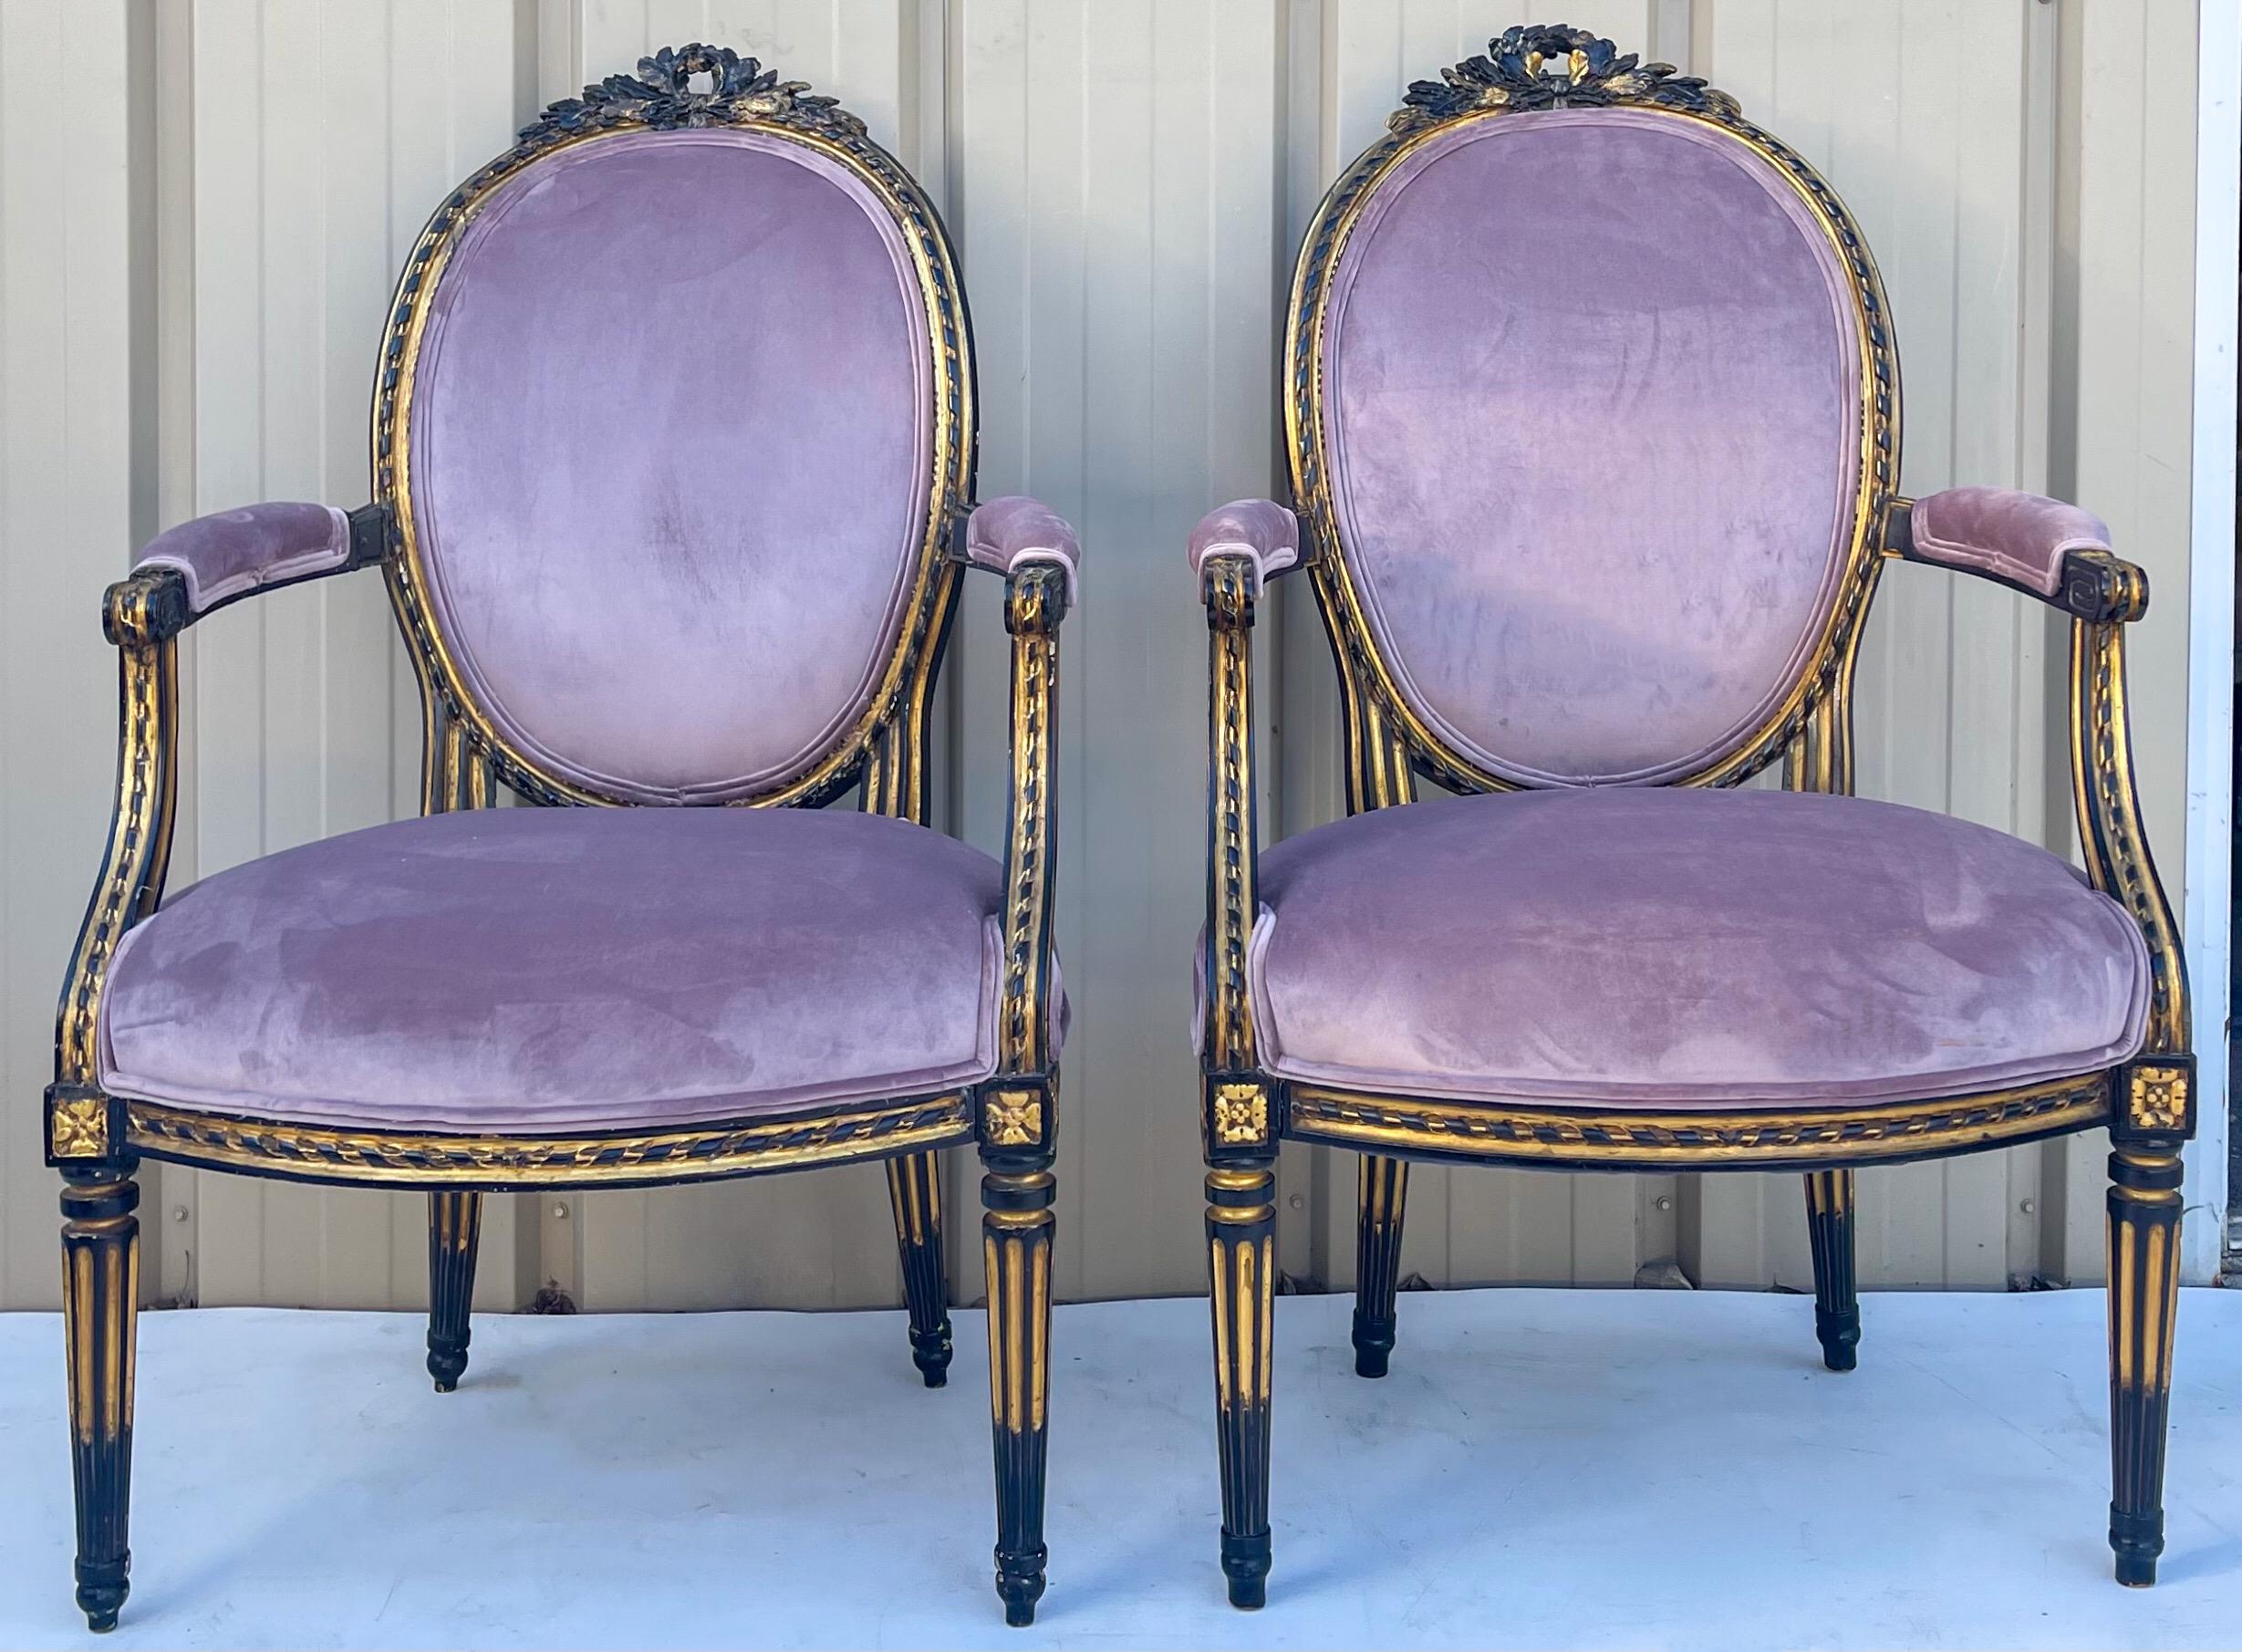 This is a pair of late 19th century French ebonized and parcel-gilt bergère chairs. They have Louis XIV styling. The lavender velvet upholstery is a recent addition. The ebonized and gilt frames are nicely carved. They are in very good condition.